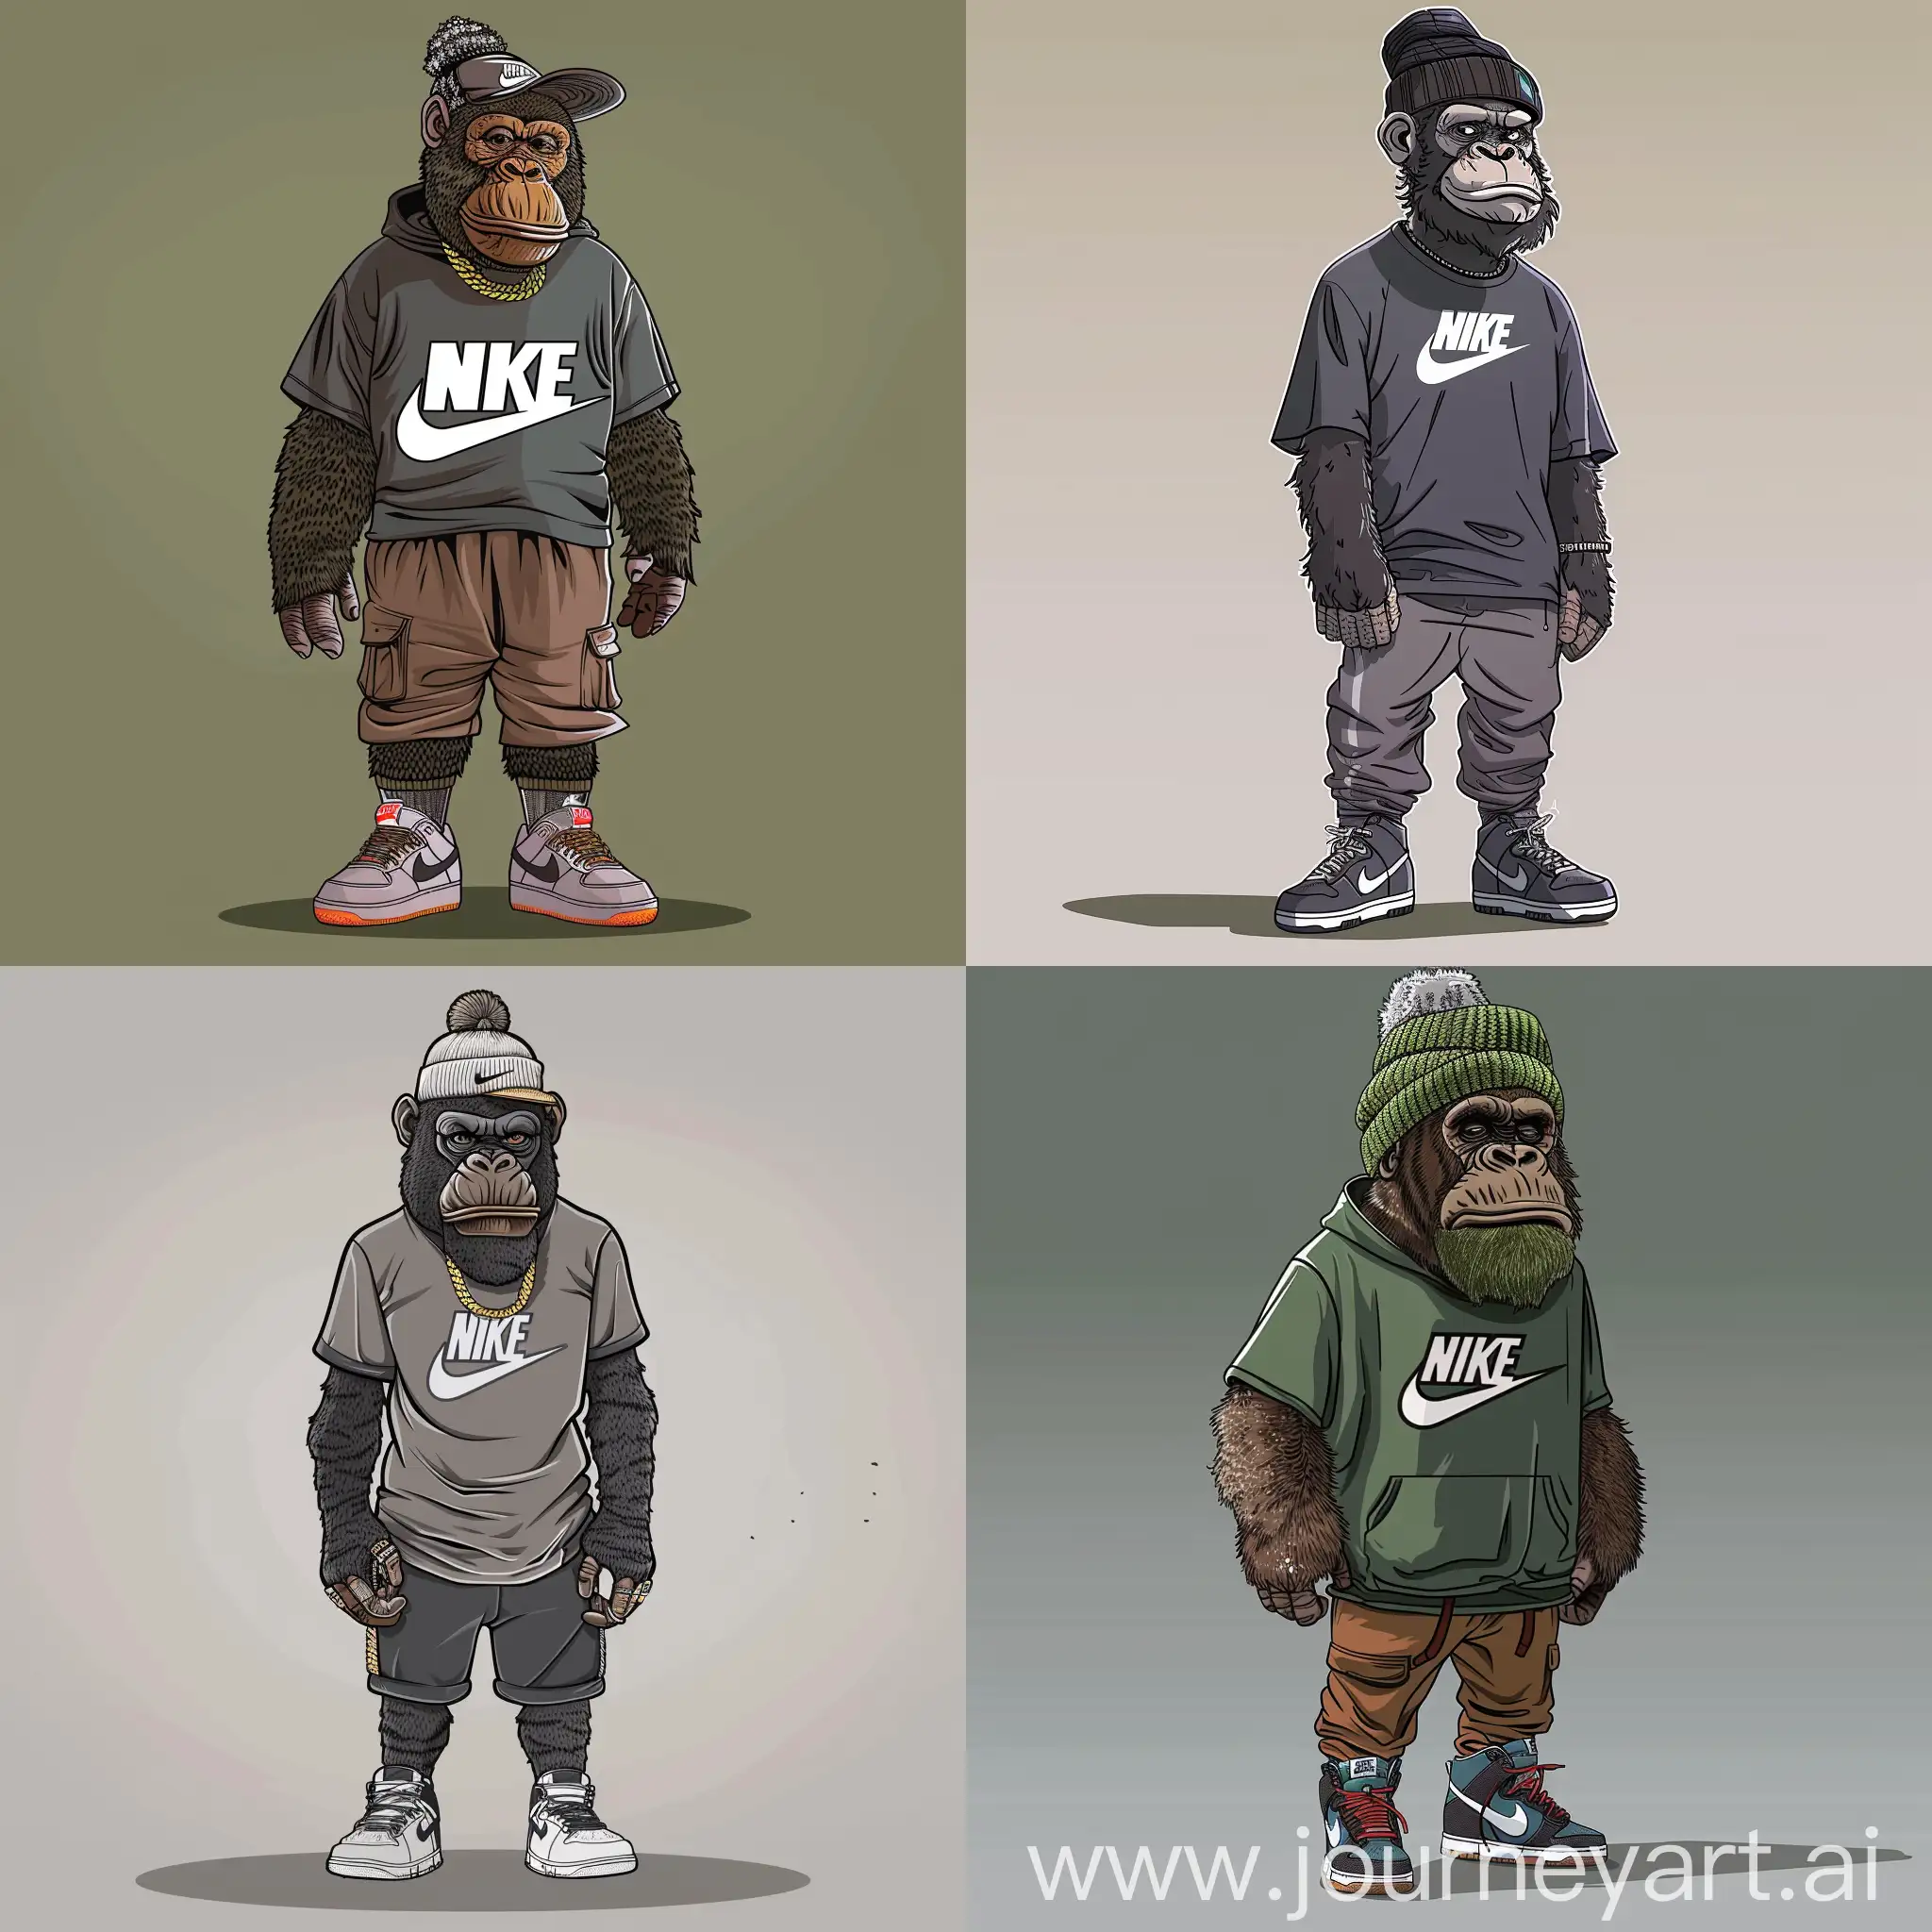 a cartoon of a Kong wearing a Nike  t - shirt, Nike shoes and a beanie, dope, most dope, 2 d style, 2 d anime style, hiphop, cartoon art style, thug life, nipsey hussle, hip hop aesthetic, hip hop style, mcbess, anime style”, rap bling, lol style, gorillaz style, crips, hip hop

Variation number 1